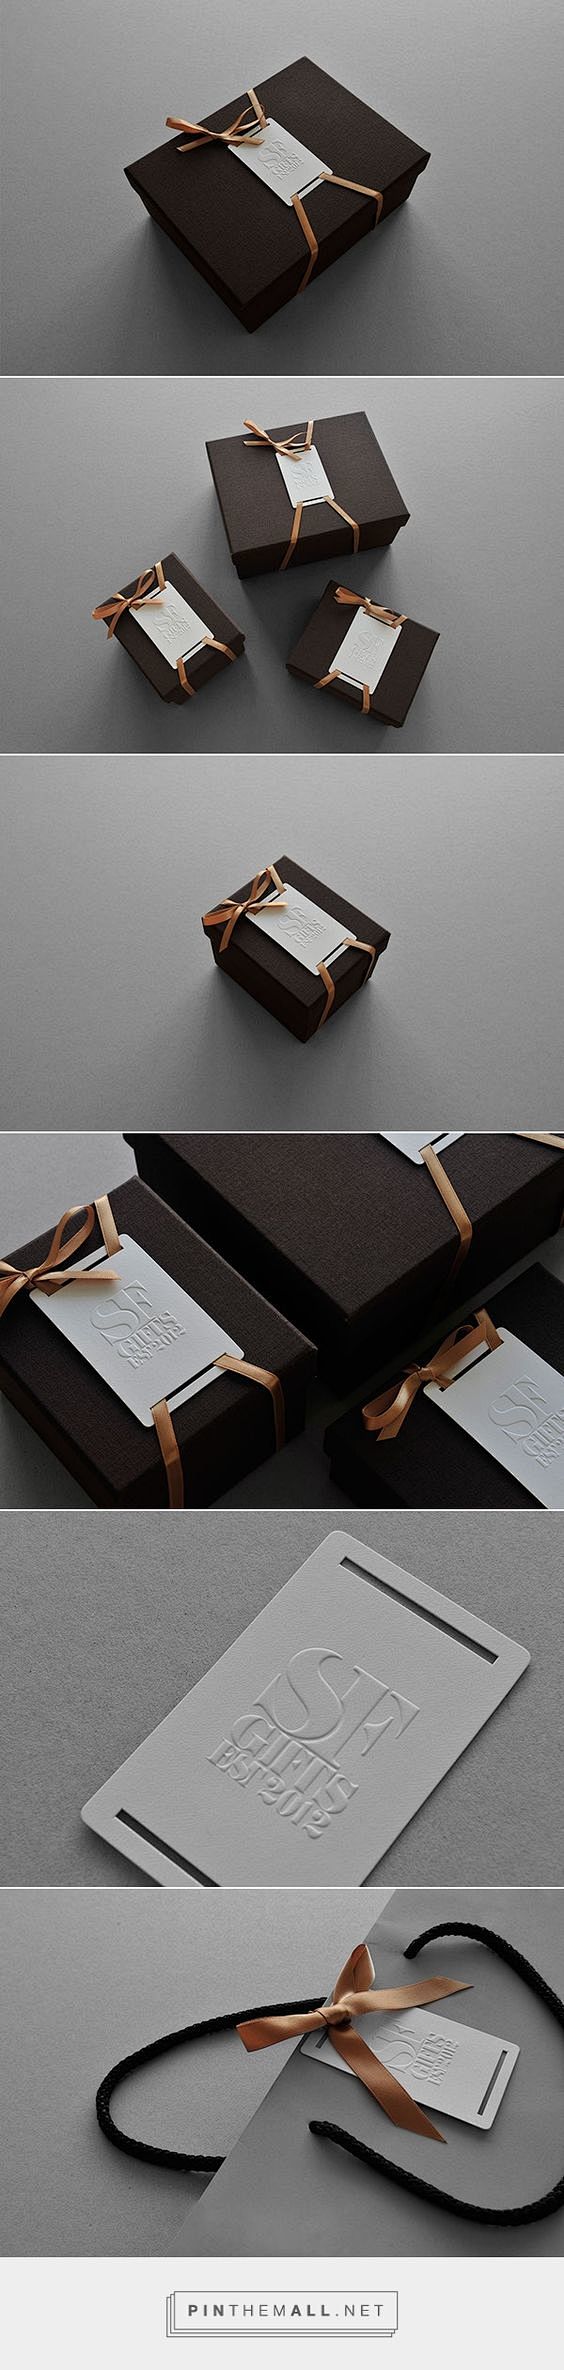 SF Gifts on Behance: